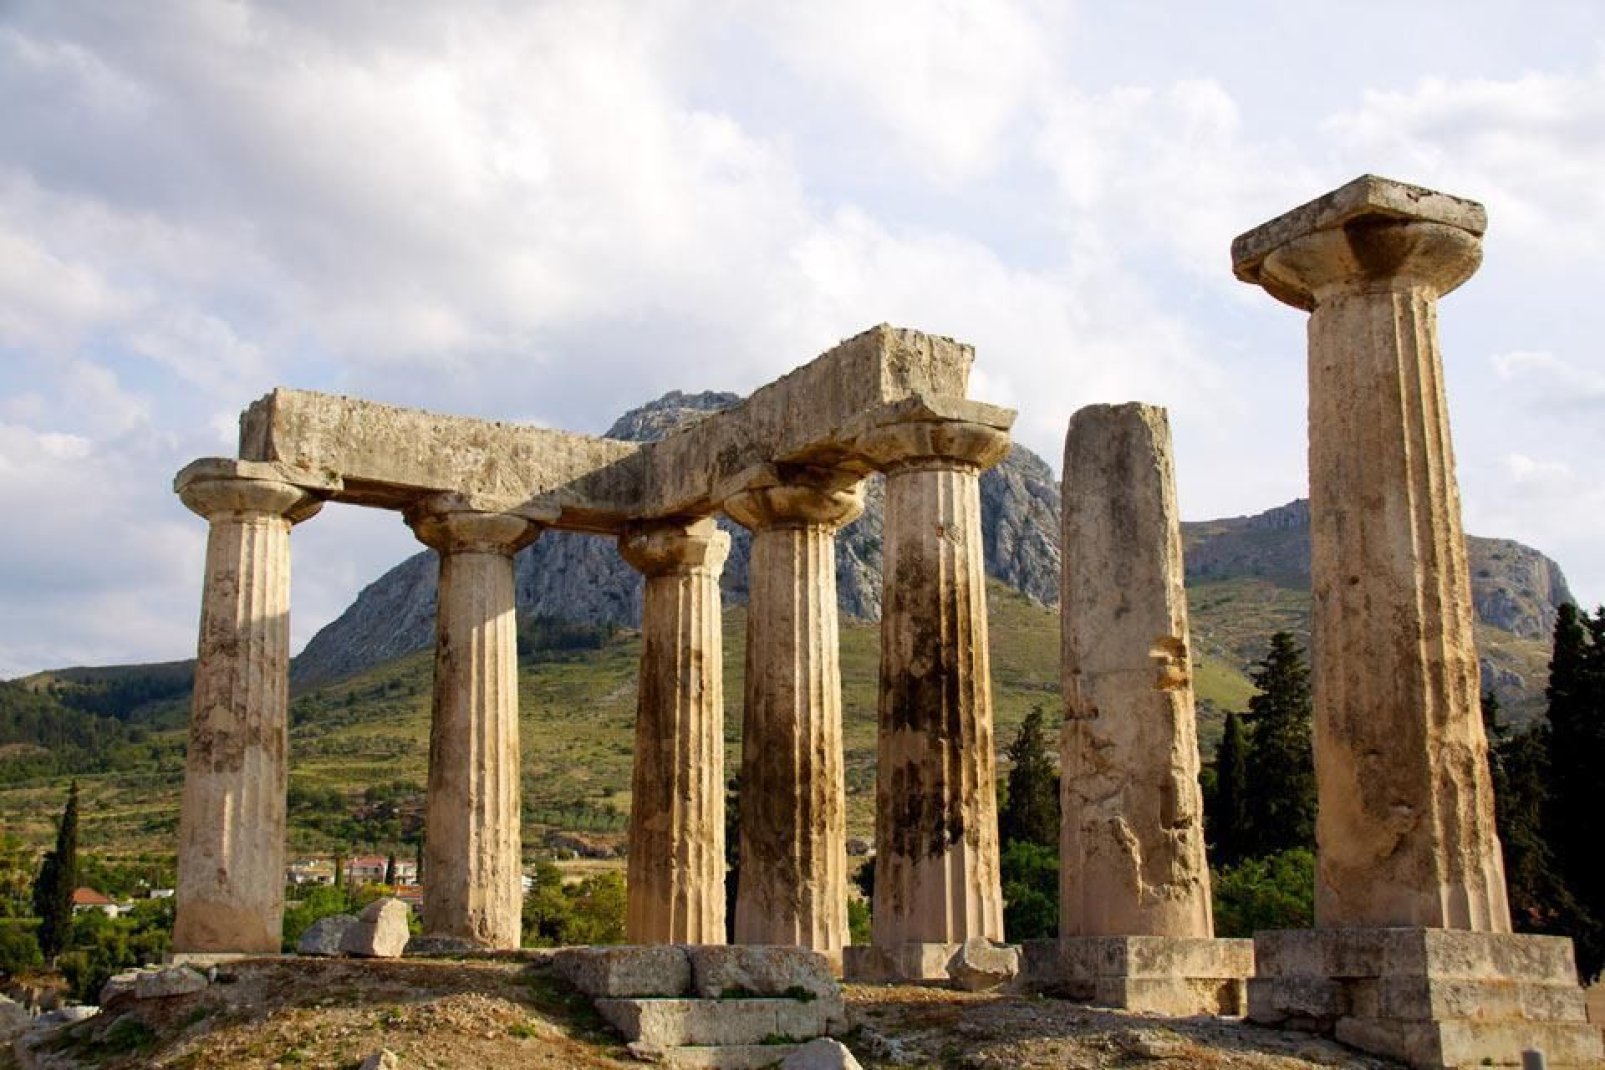 Corinth was one of the most important cities in ancient Greece.